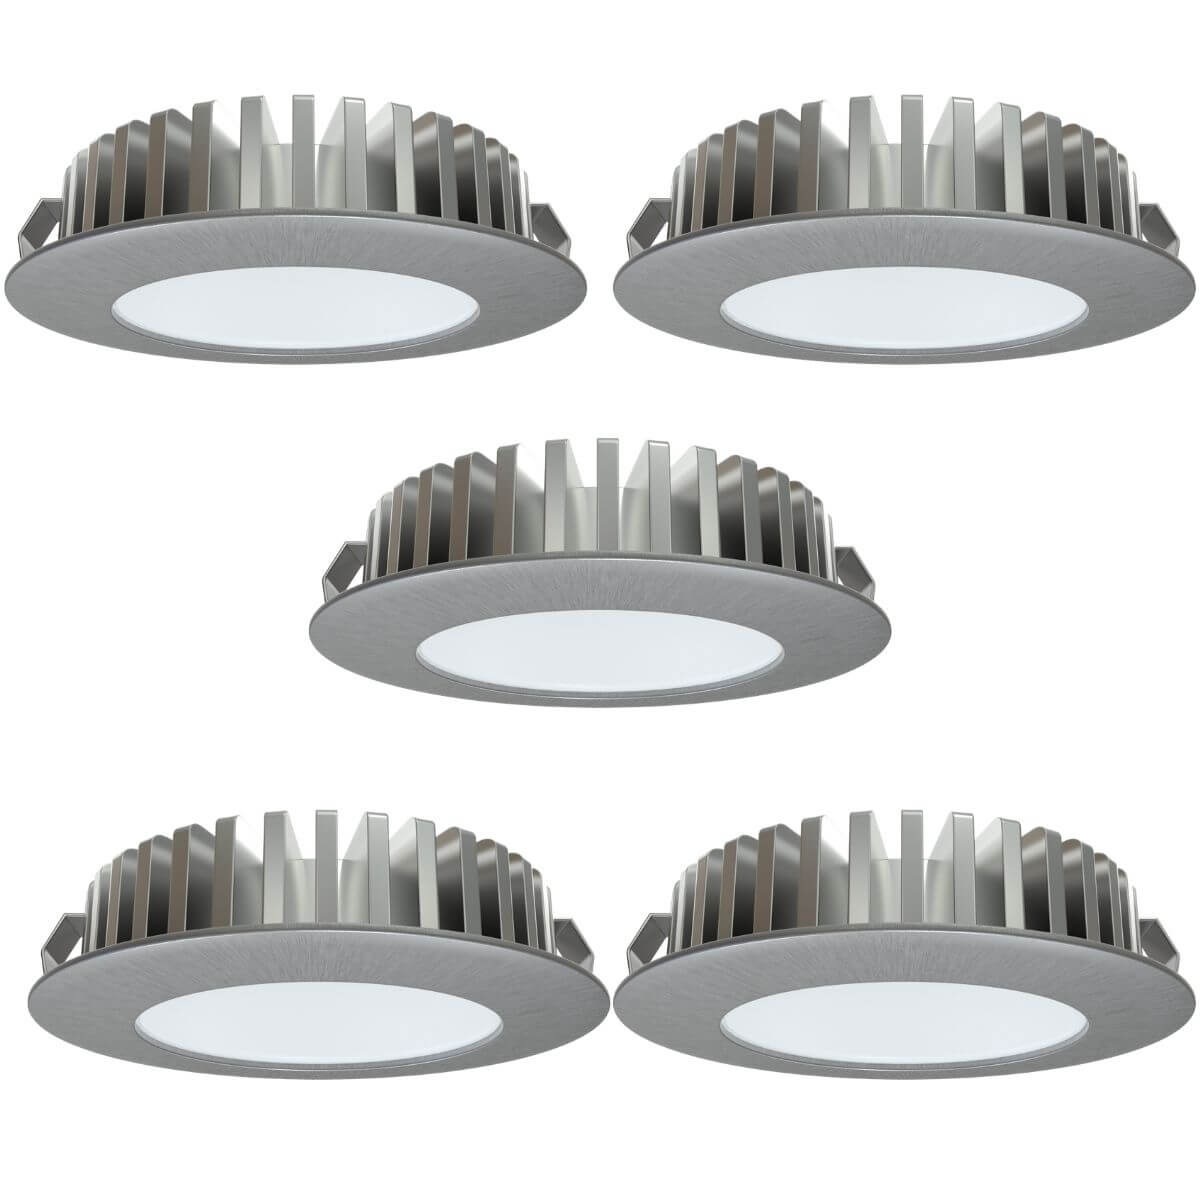 View Pack of 5 High Brightness Recessed LED Under Cabinet Lights 15w Driver information